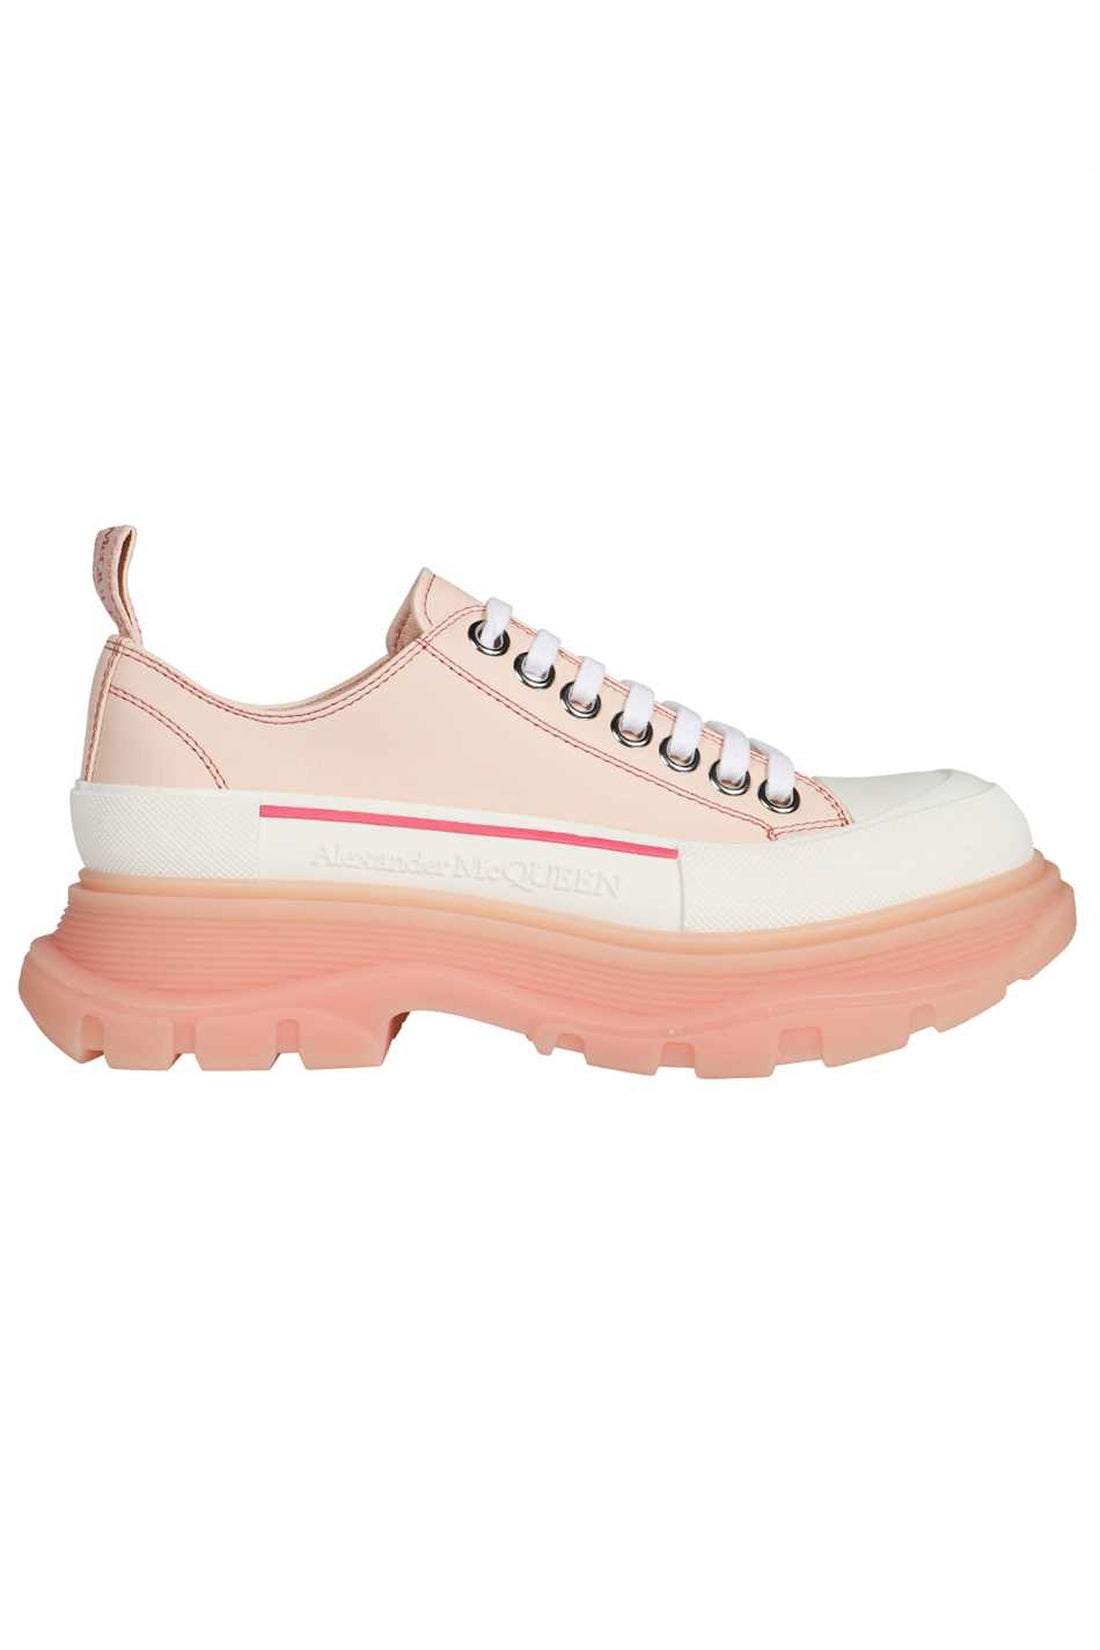 Alexander McQueen-OUTLET-SALE-Tread Slick chunky sneakers-ARCHIVIST